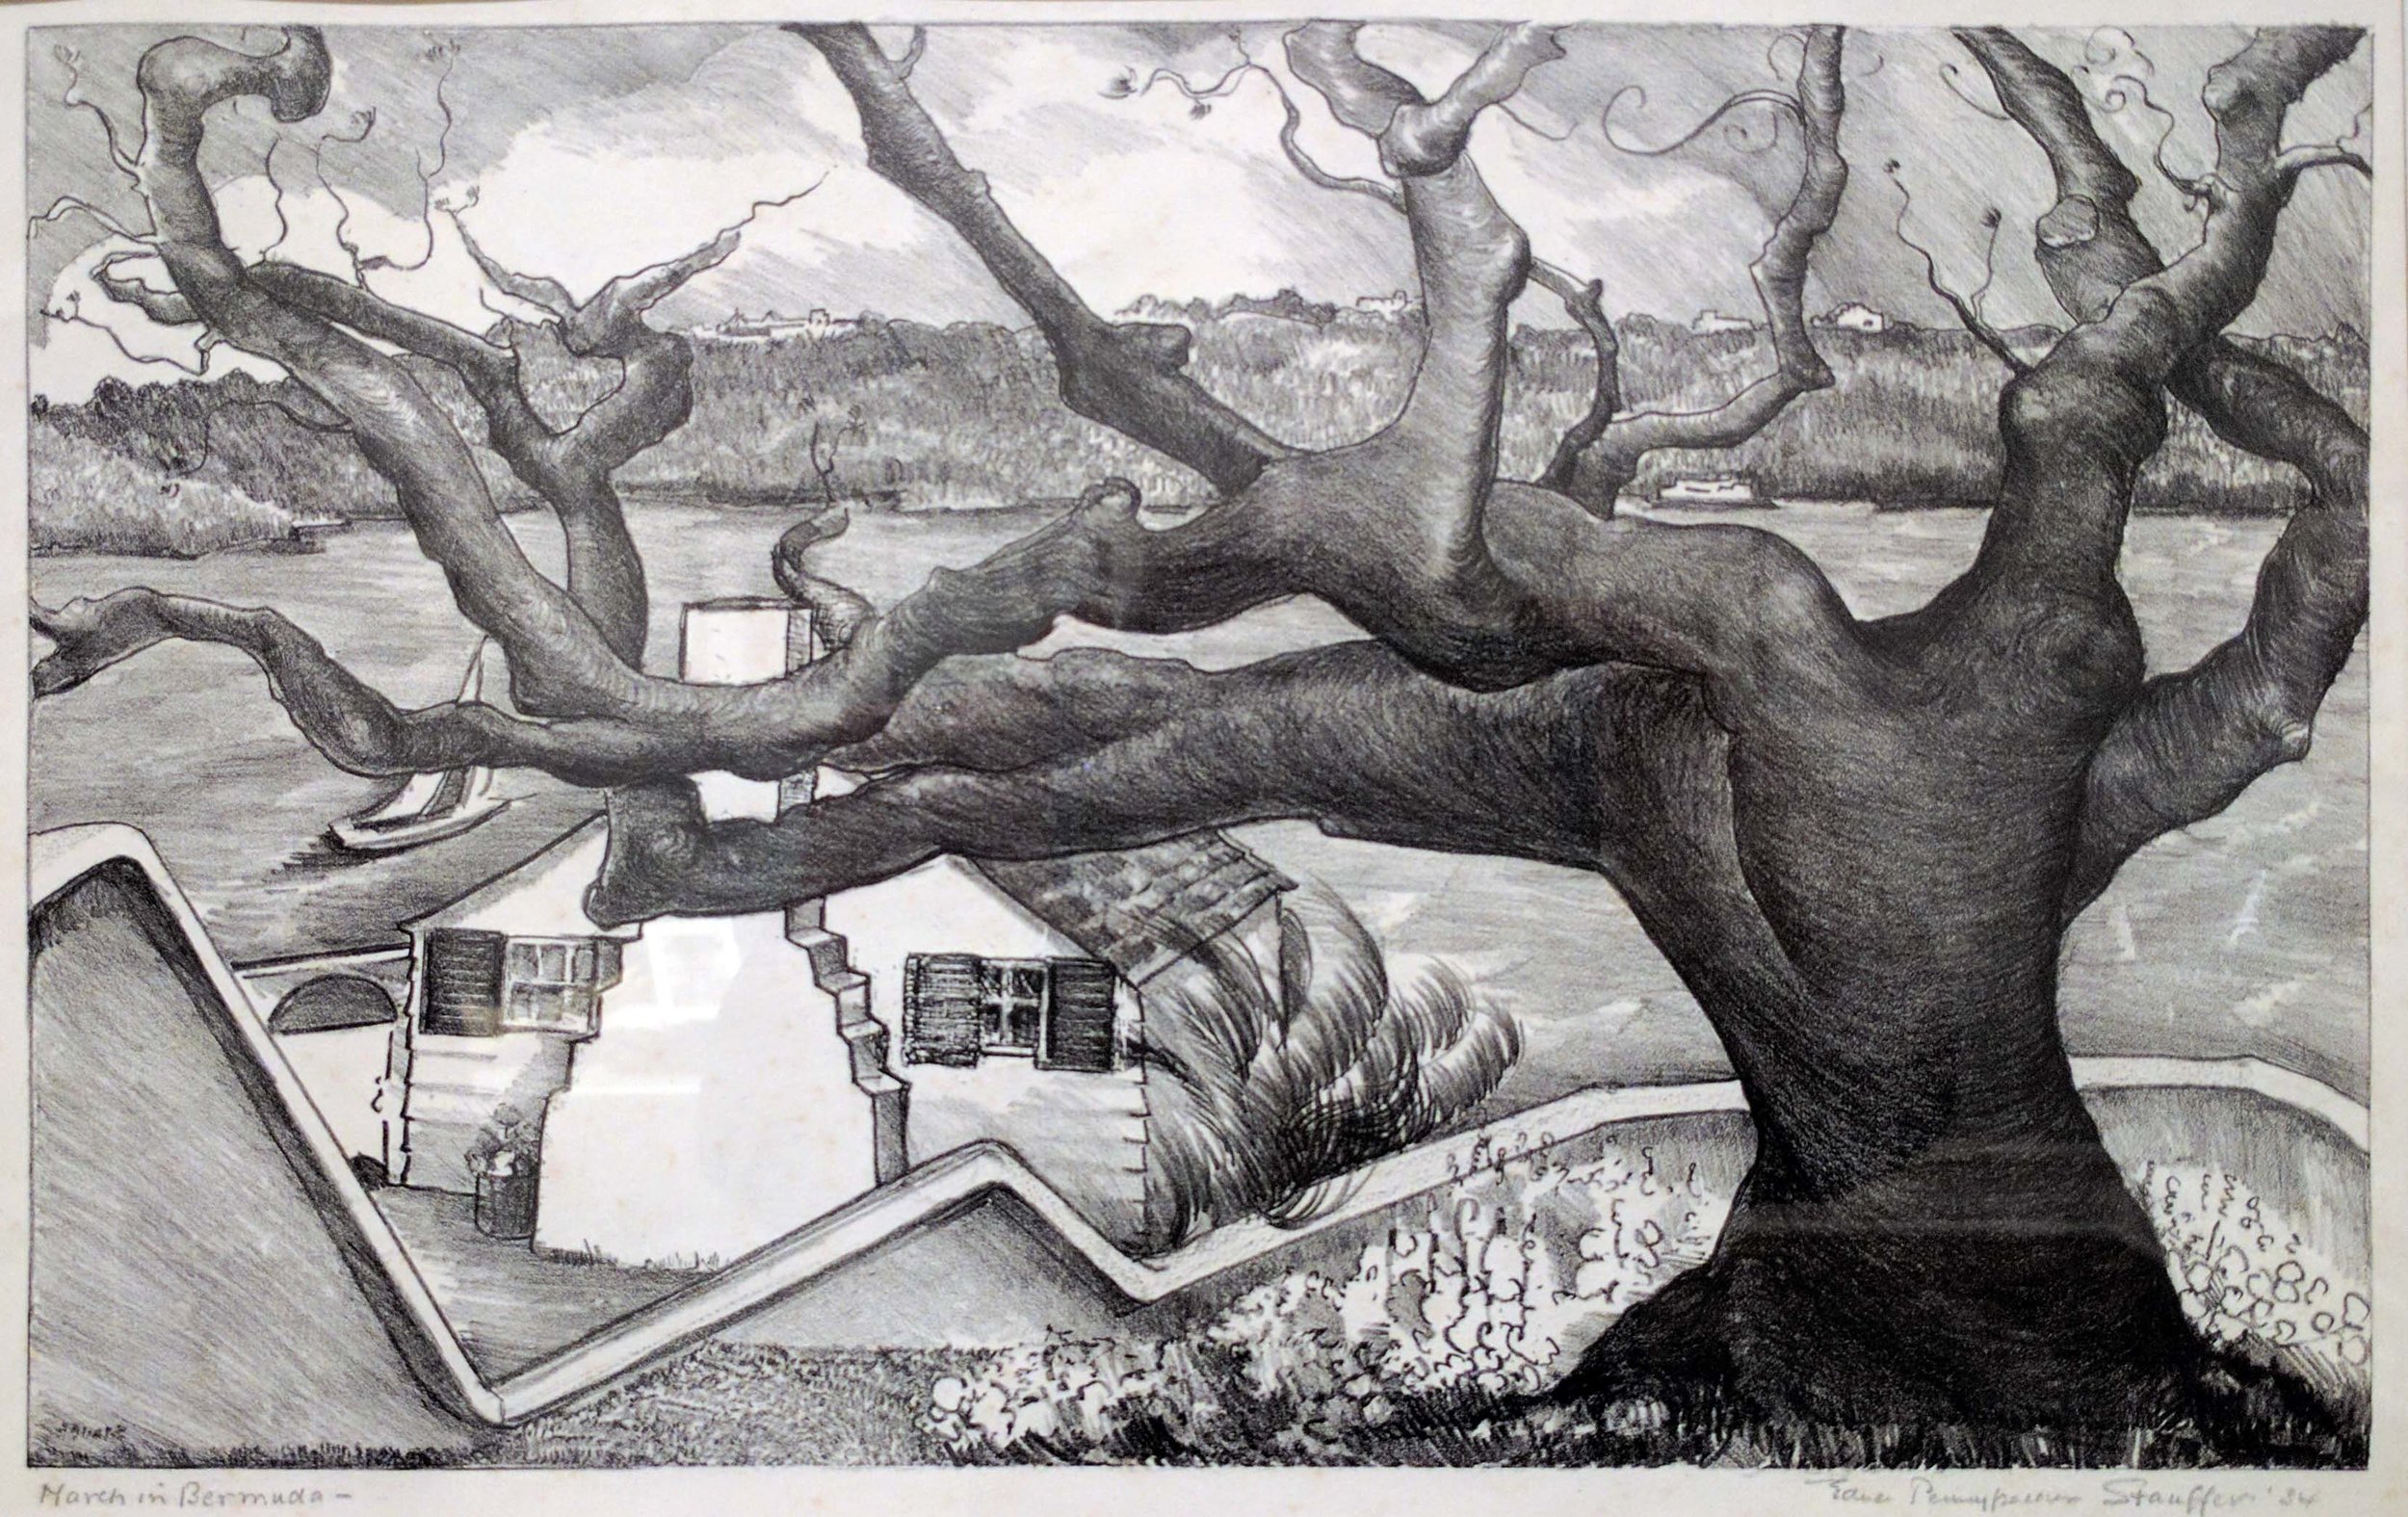 Drawing of a large tree with many branches. There is a house and field in the background.